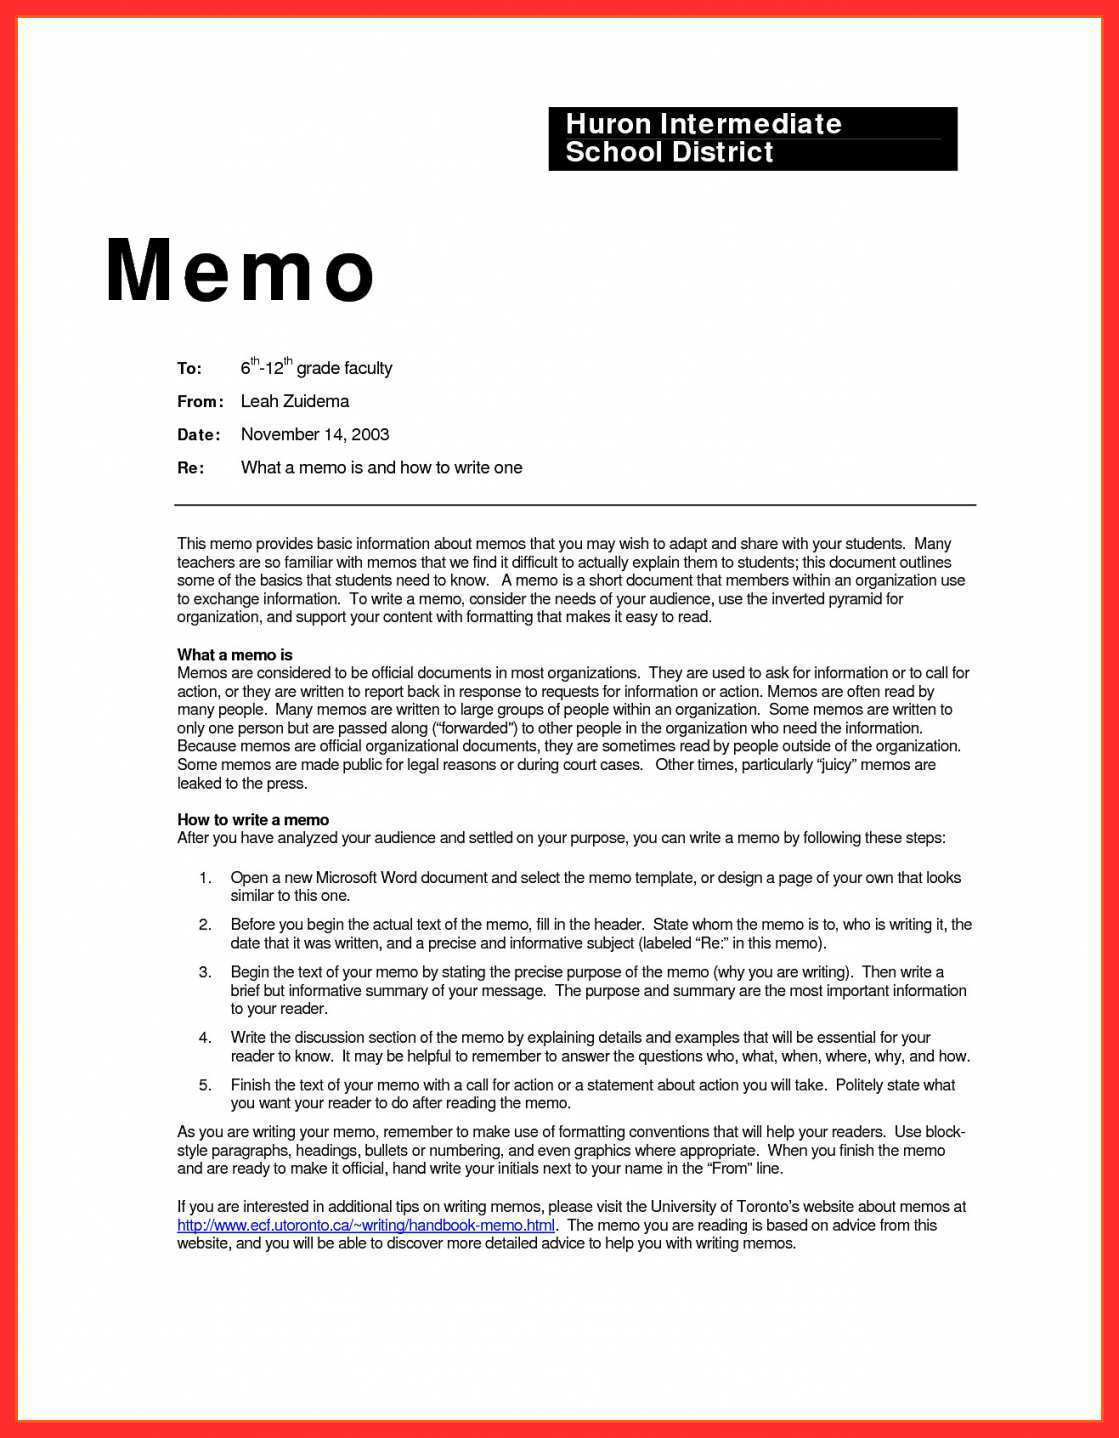 80 Customize Our Free Meeting Agenda Memo Format For Free by Meeting Agenda Memo Format